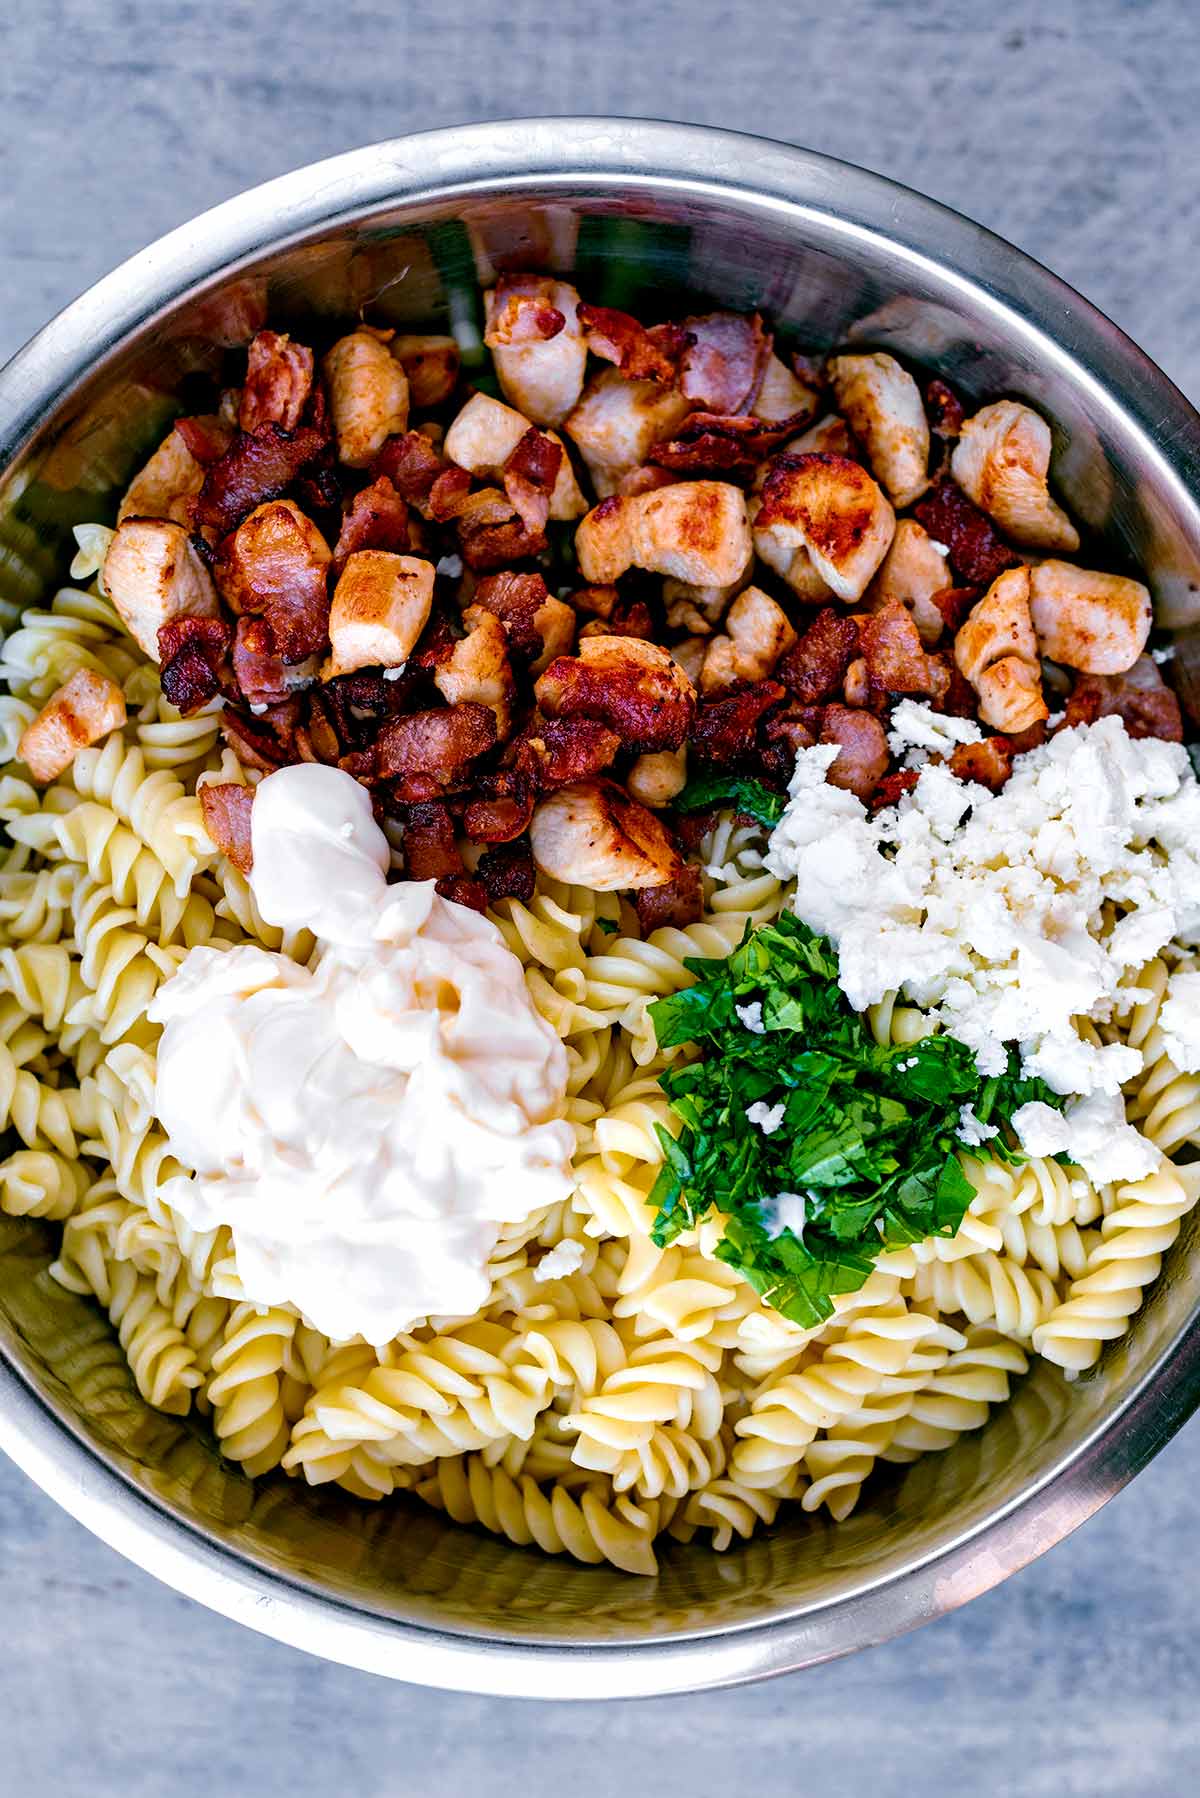 Chicken, bacon, pasta, cheese, salad vegetables, herbs and mayonnaise in a bowl.